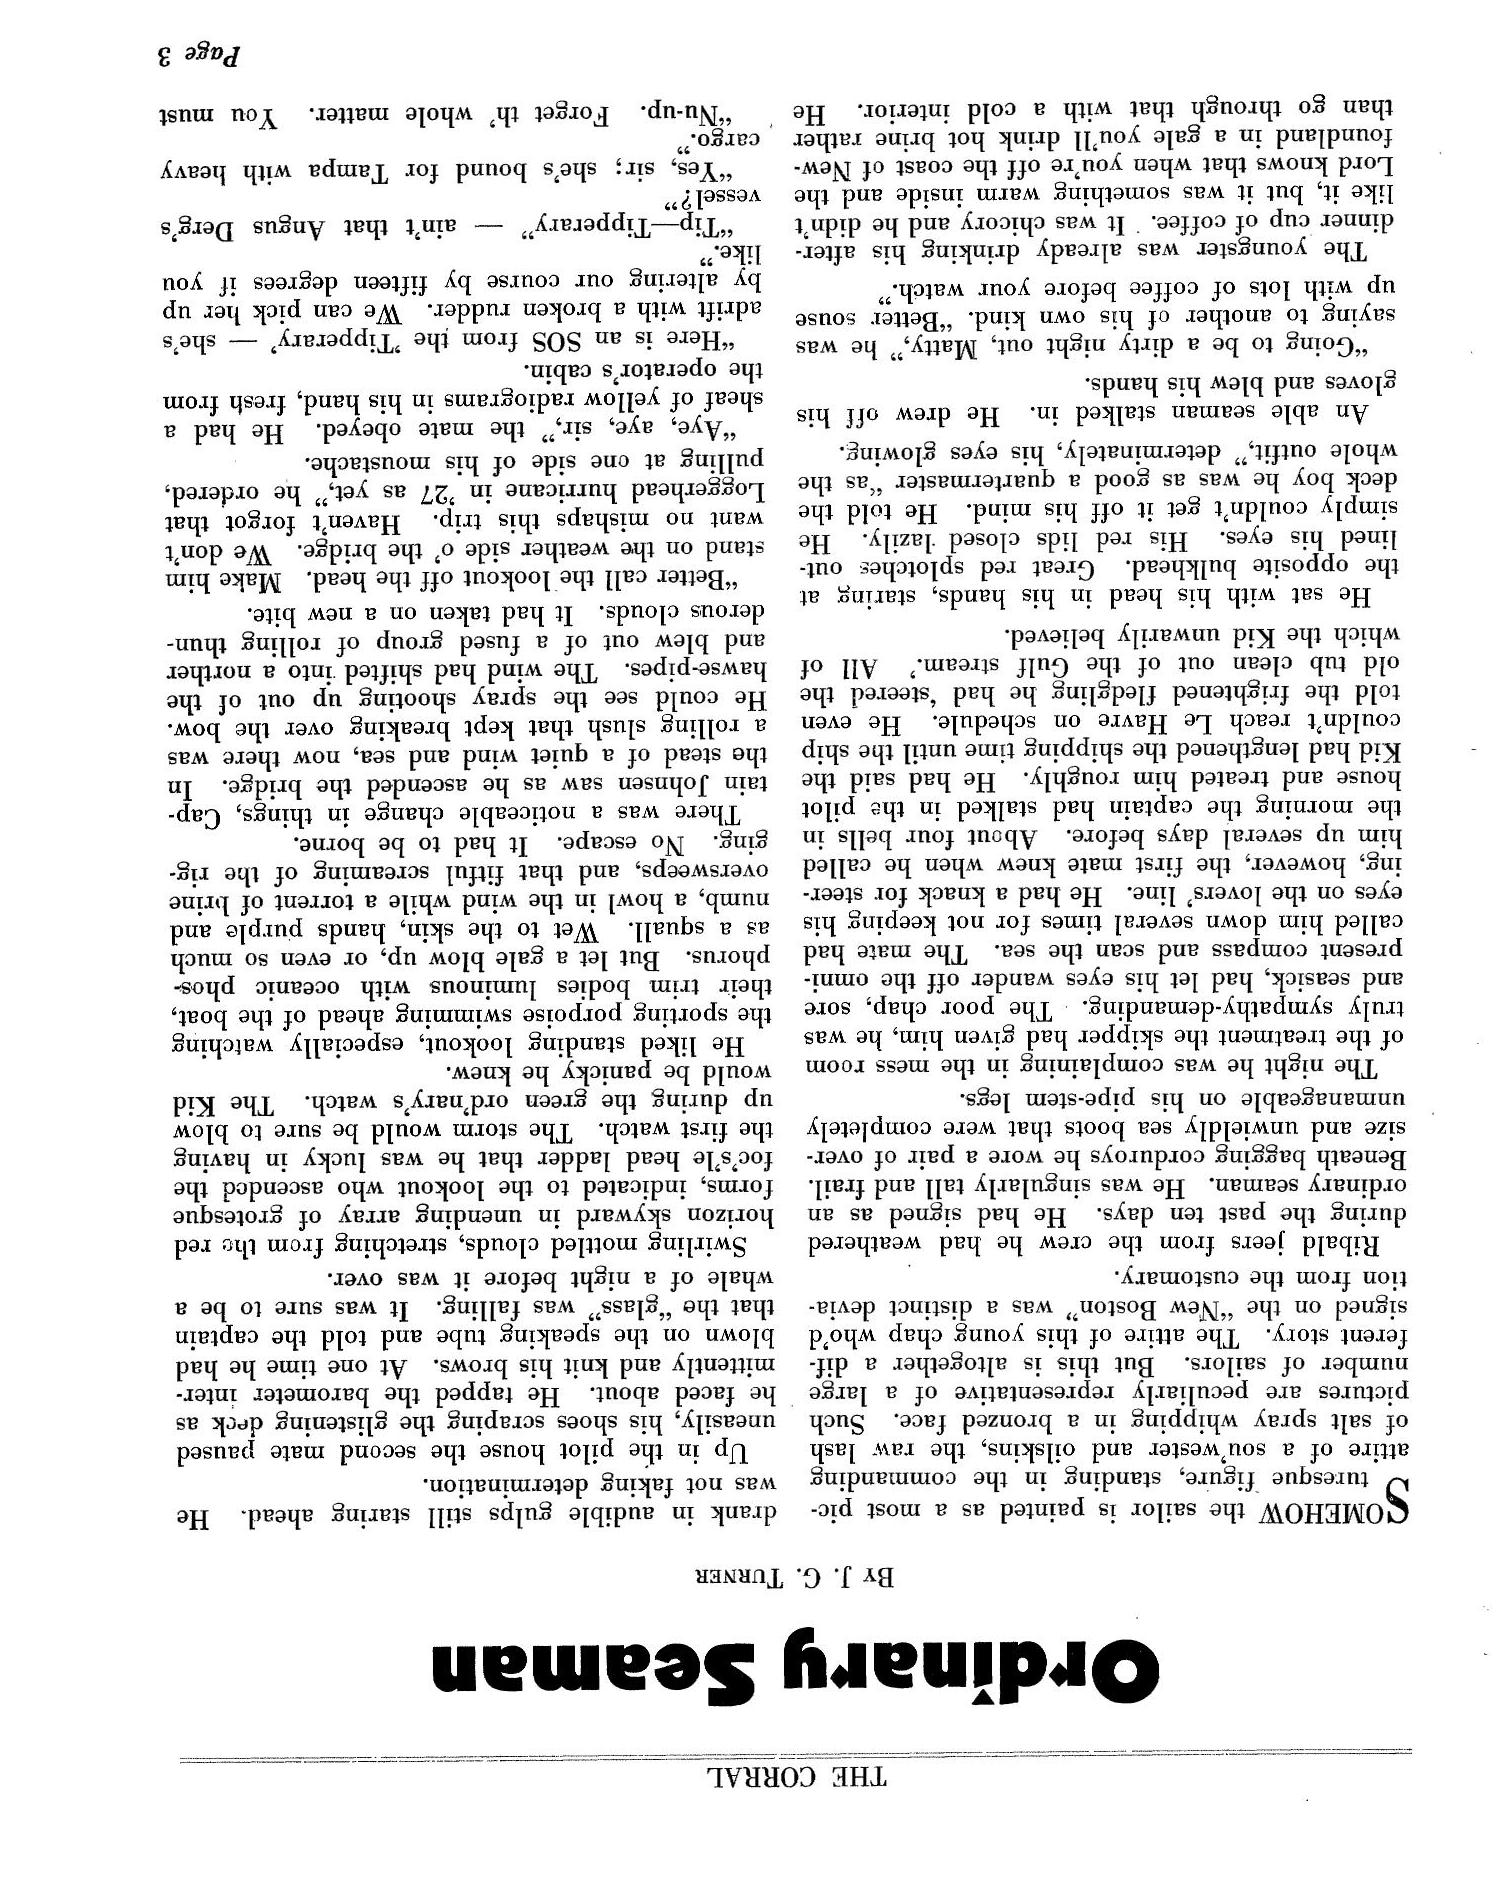 The Corral, Volume [23], Number 2, March, 1933
                                                
                                                    3
                                                